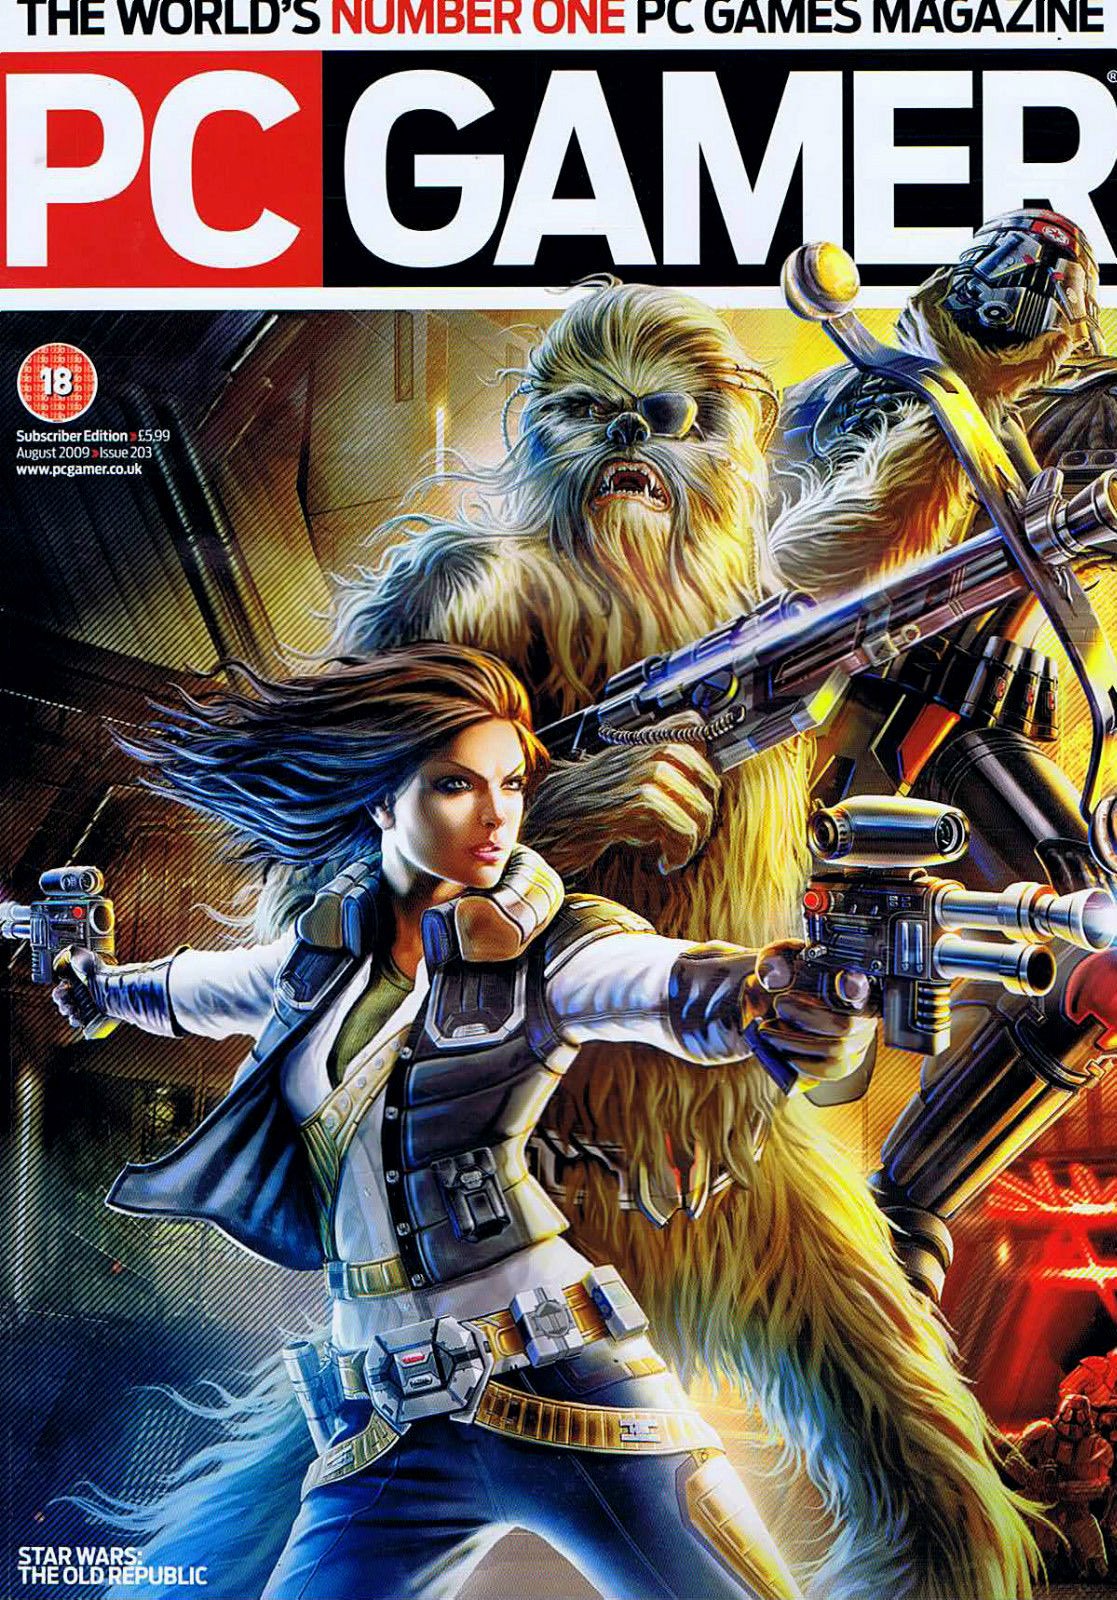 PC Gamer UK 203 August 2009 (subscriber edition)